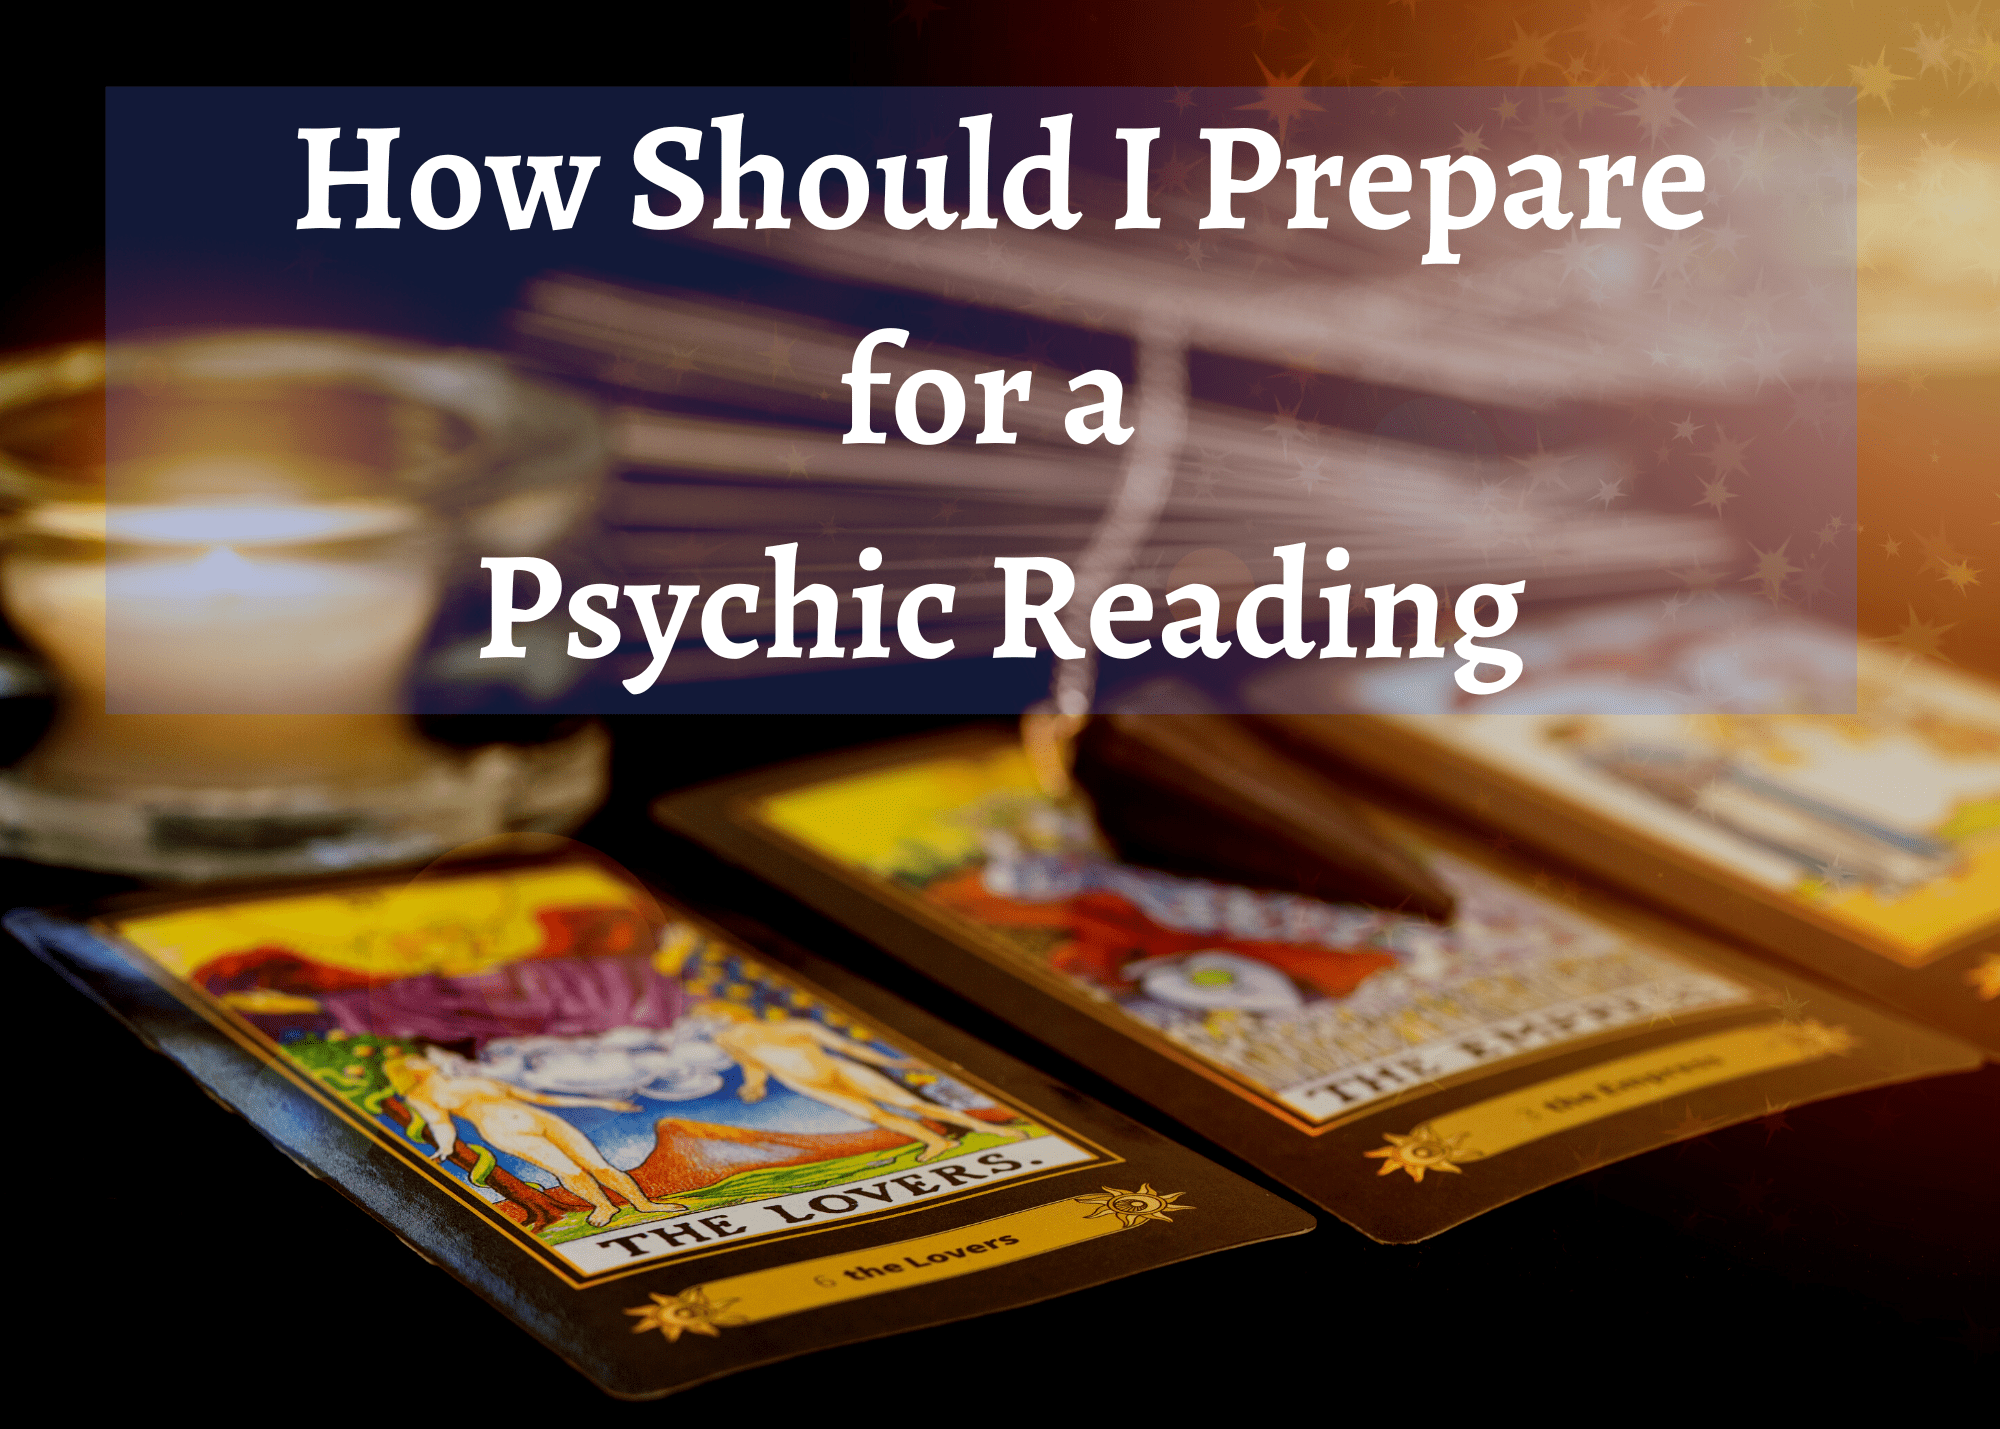 Prepare for a psychic reading